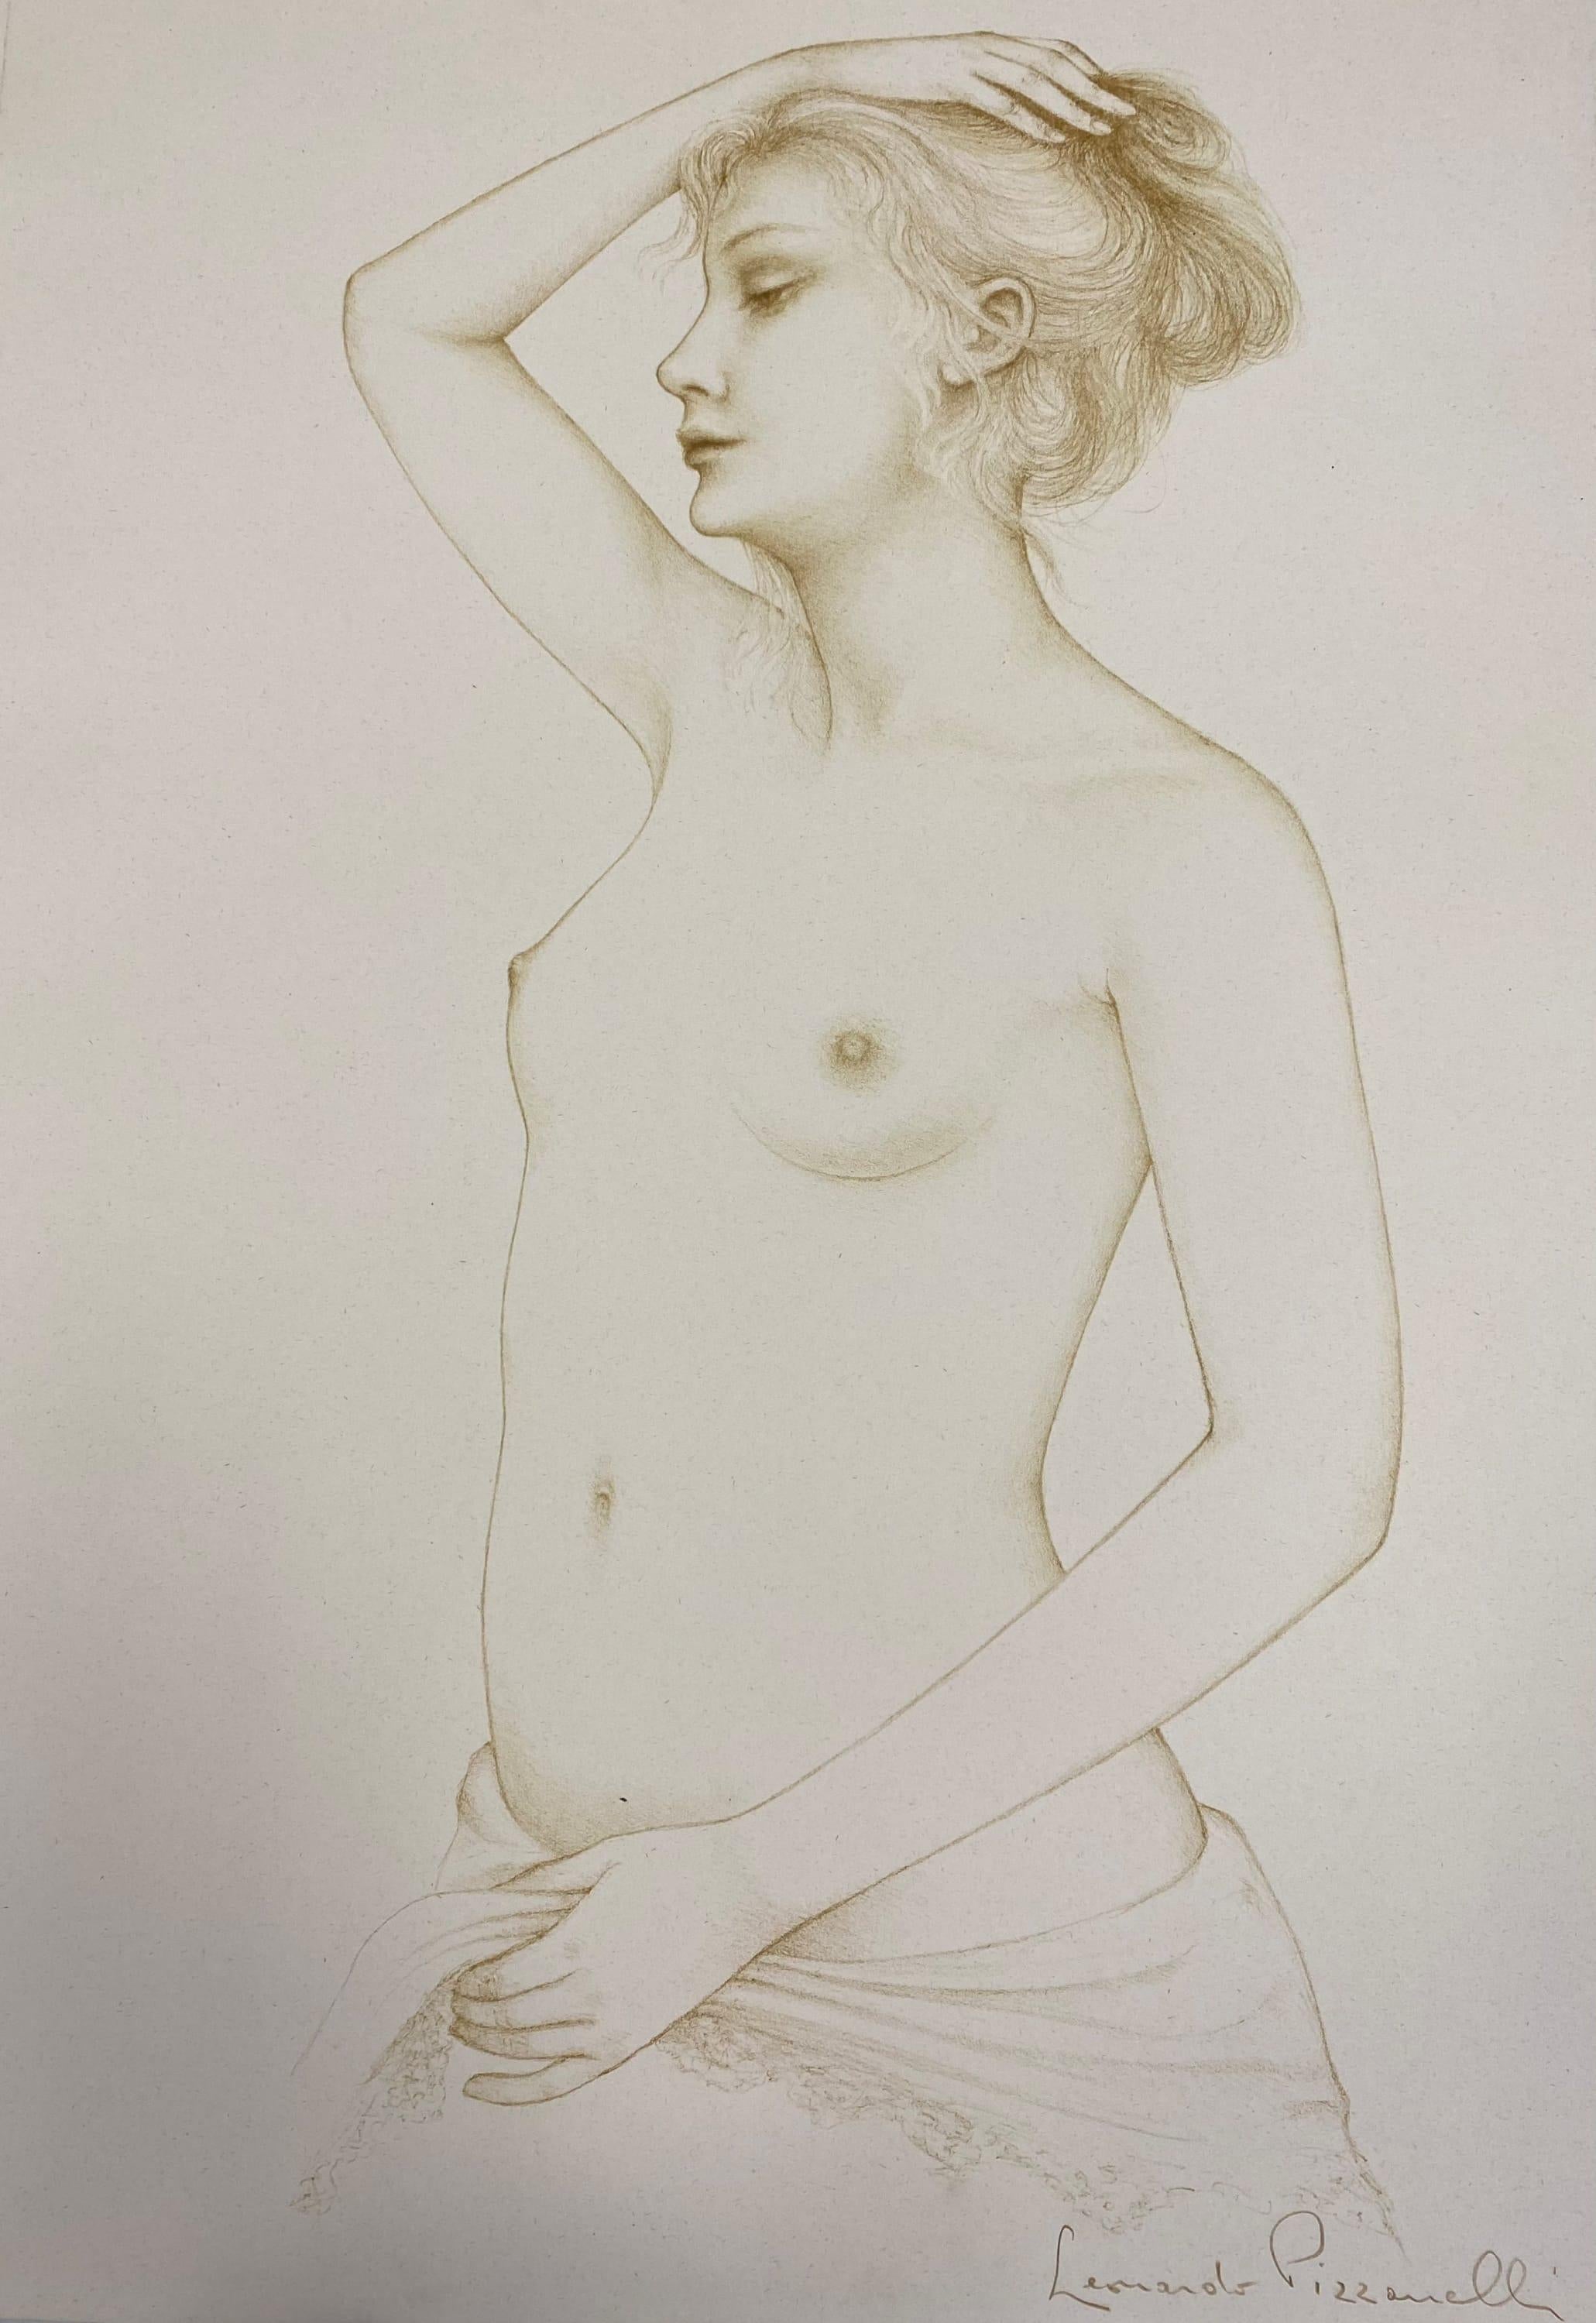 This framed 36" x 25.5" lithograph on paper by Leonardo Pizzanelli is an elegant depiction of a standing nude female in sepia tones. The female figure is facing profile to the left, standing, and holding a sheet around her lower half. Her right arm